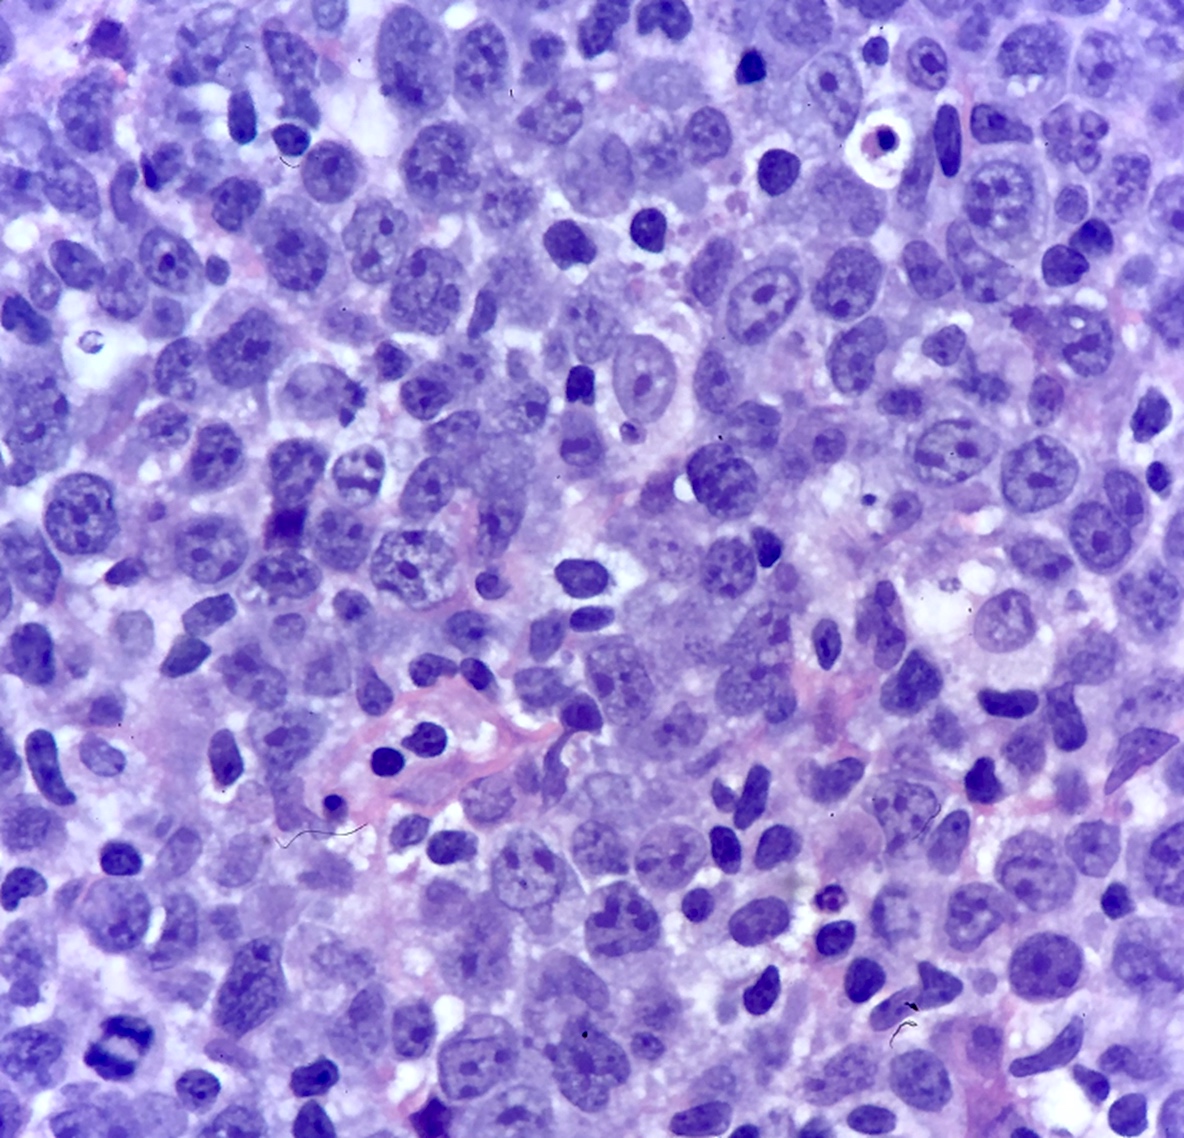 Cytologic features